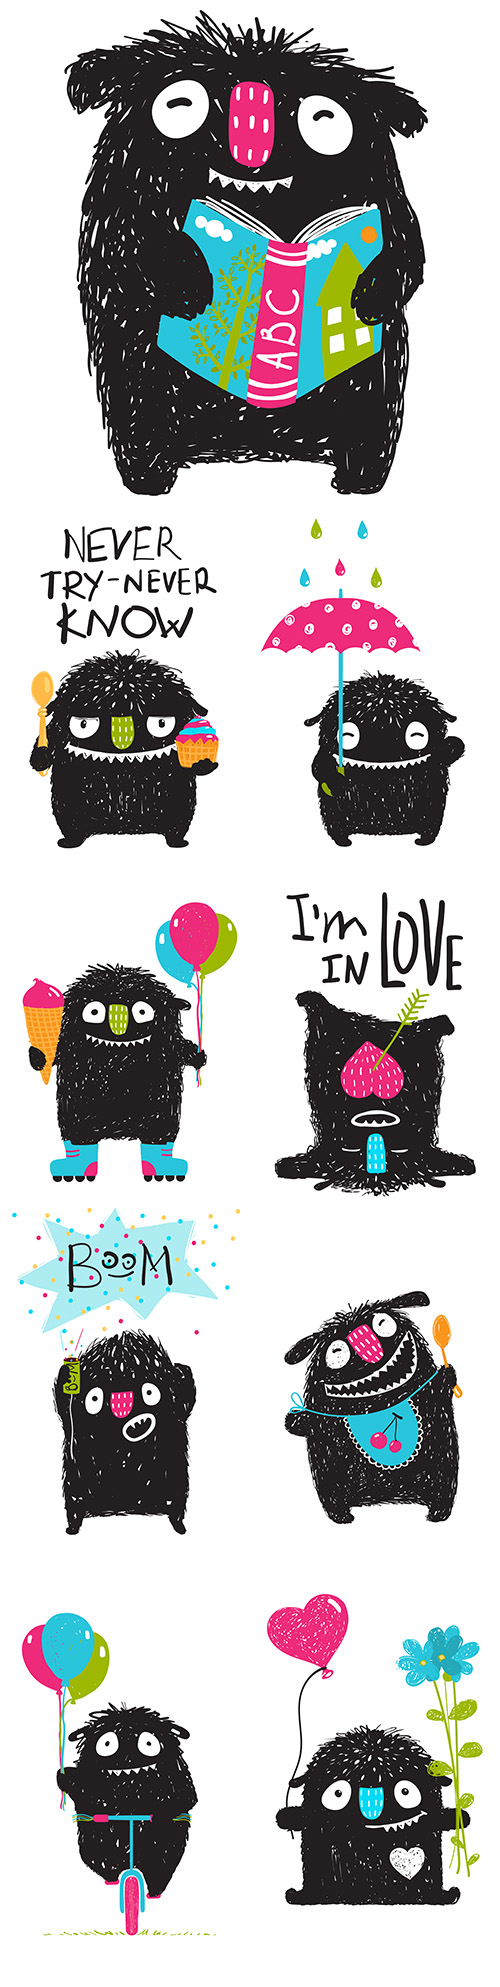 Funny monster with flowers and hearts illustration for children
